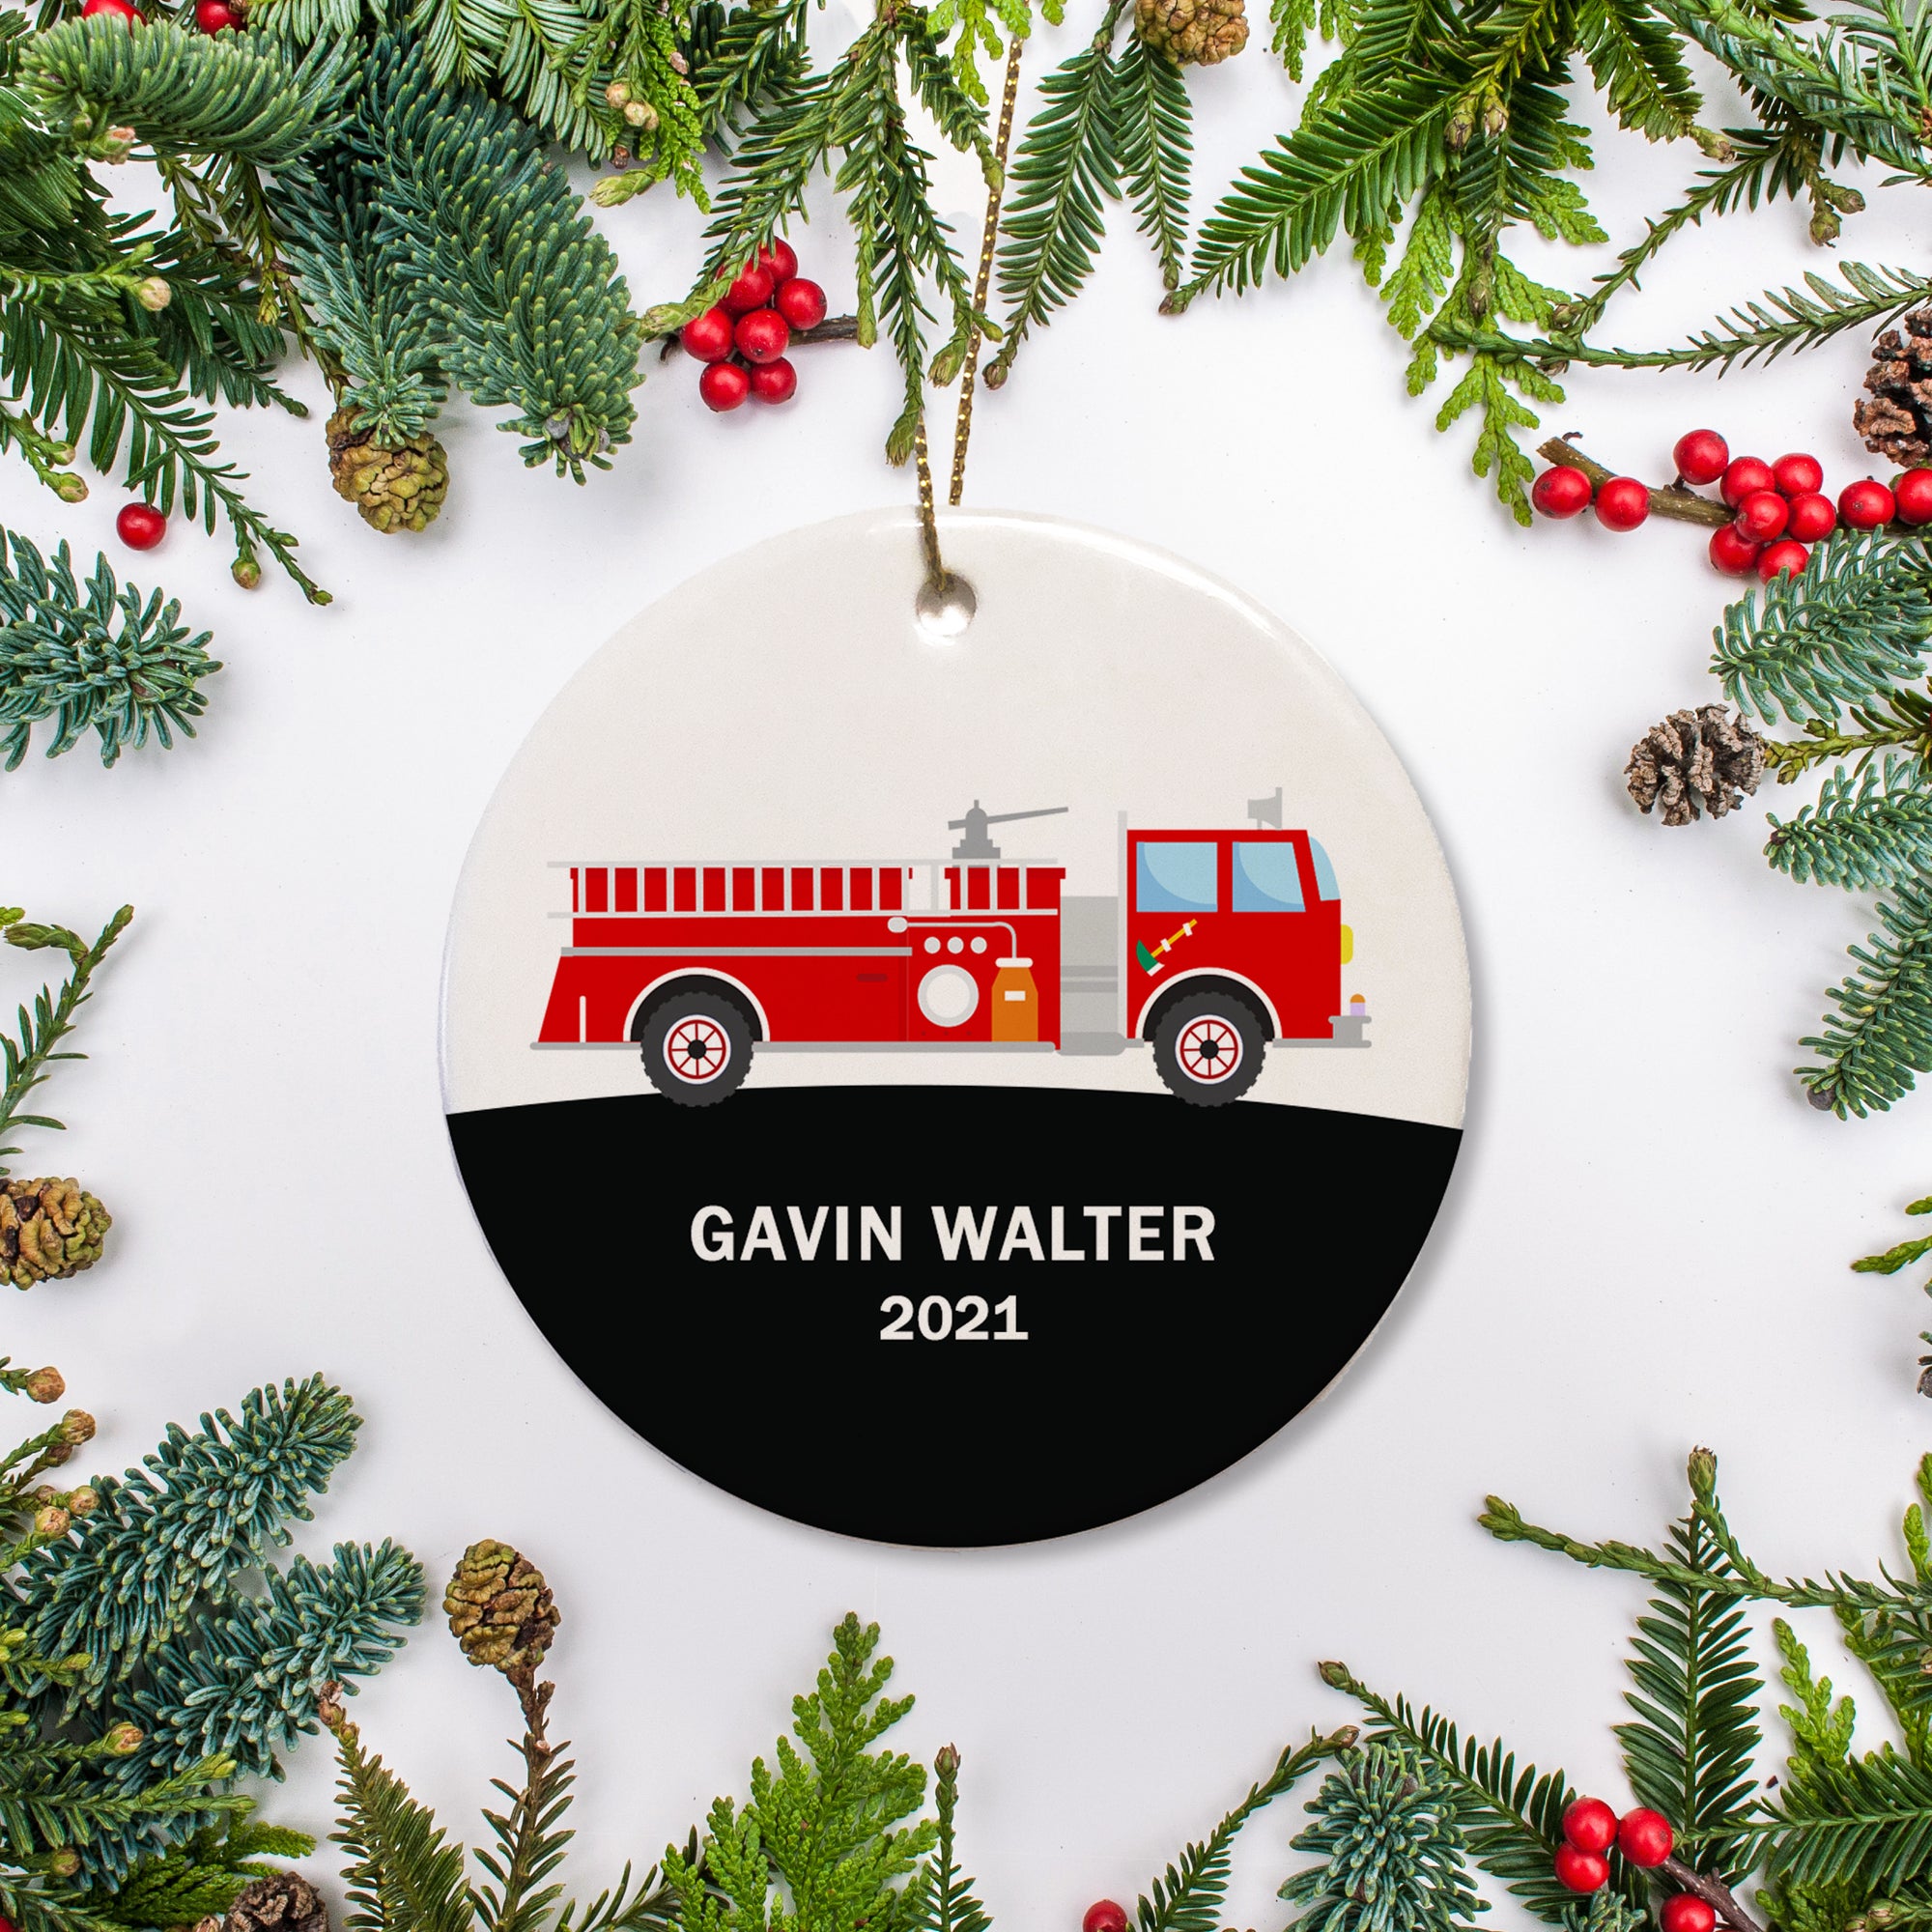 Red ladder fire engine truck personalized Christmas Ornament. Add name and year of your choice. PIPSY.COM